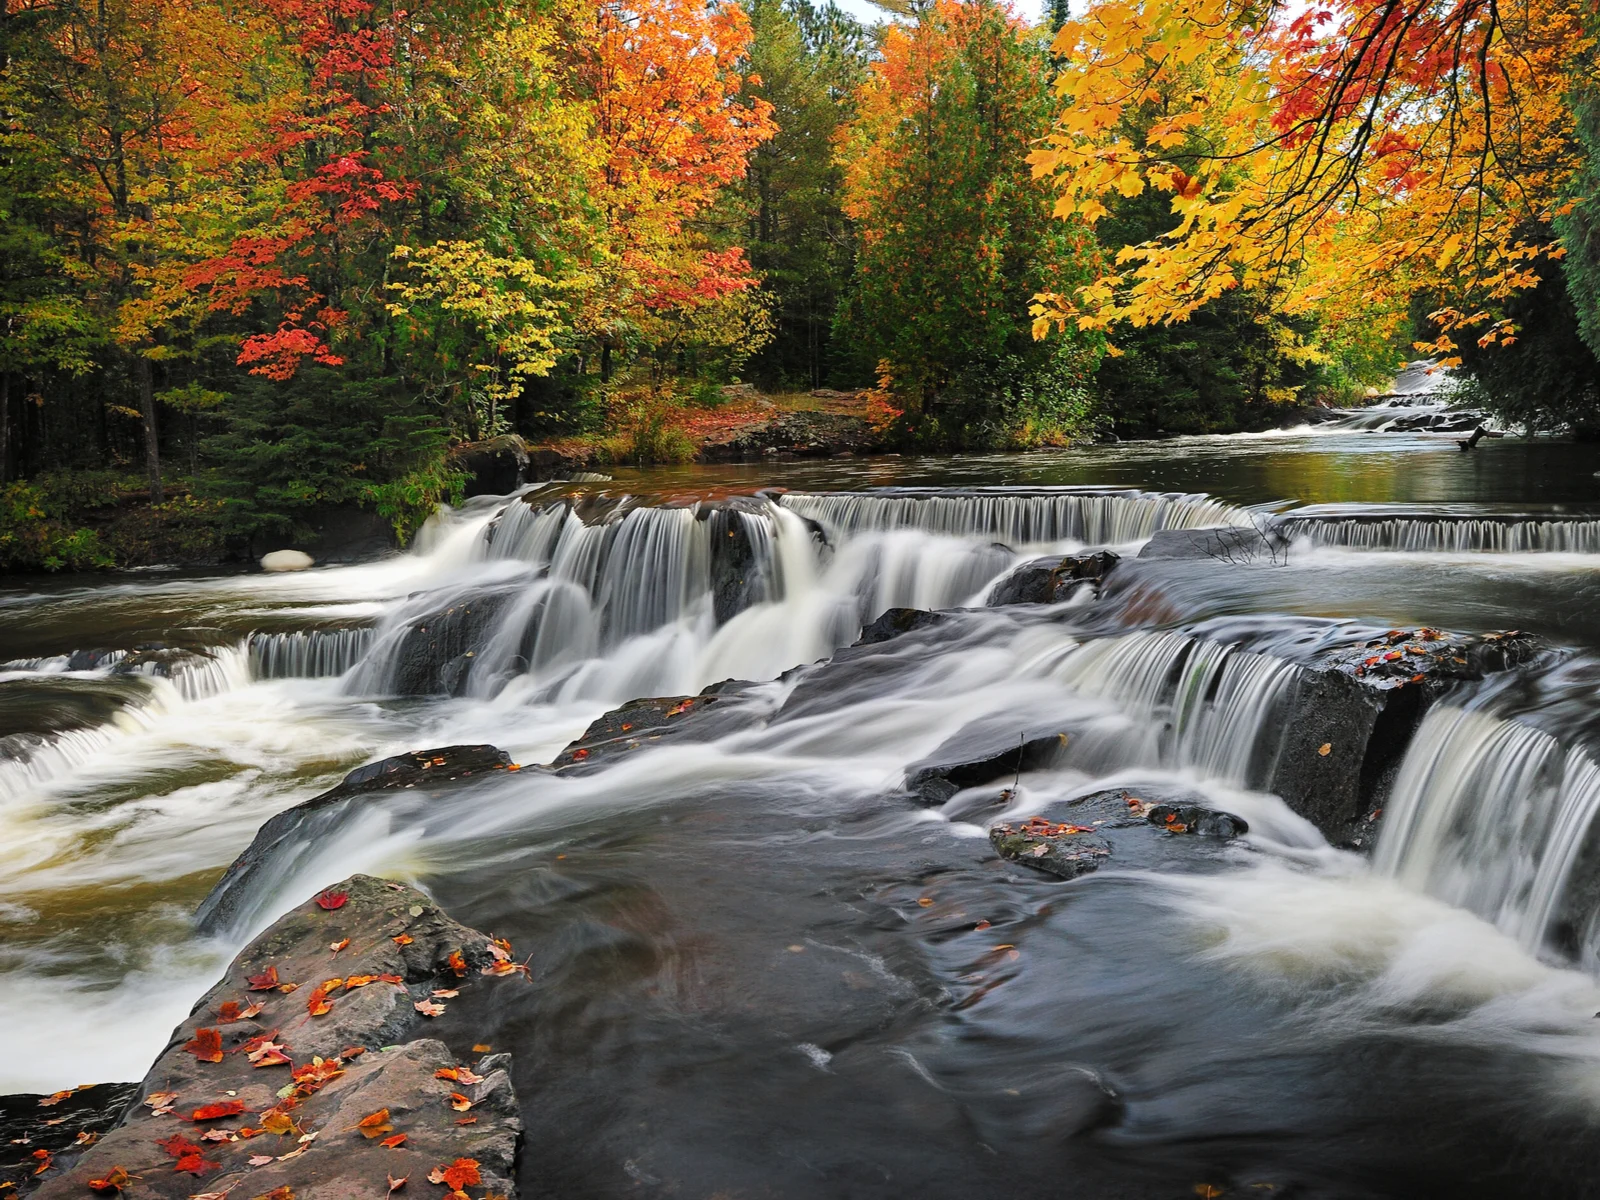 Bond Falls pictured in Autumn for a roundup of the best places to visit in Michigan